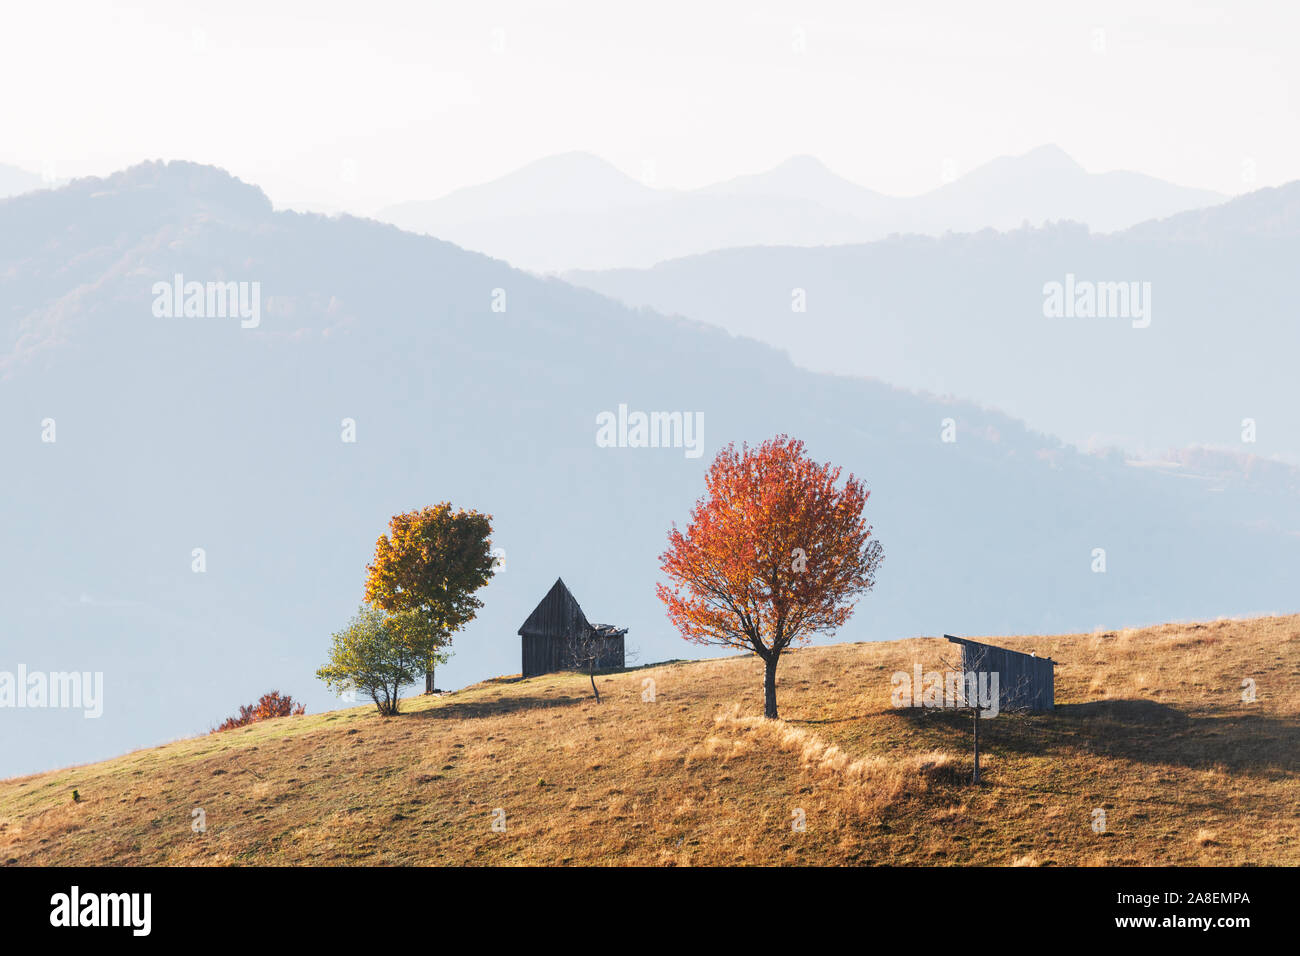 Picturesque autumn meadow with wooden house and red beech trees in the Carpathian mountains, Ukraine. Landscape photography Stock Photo